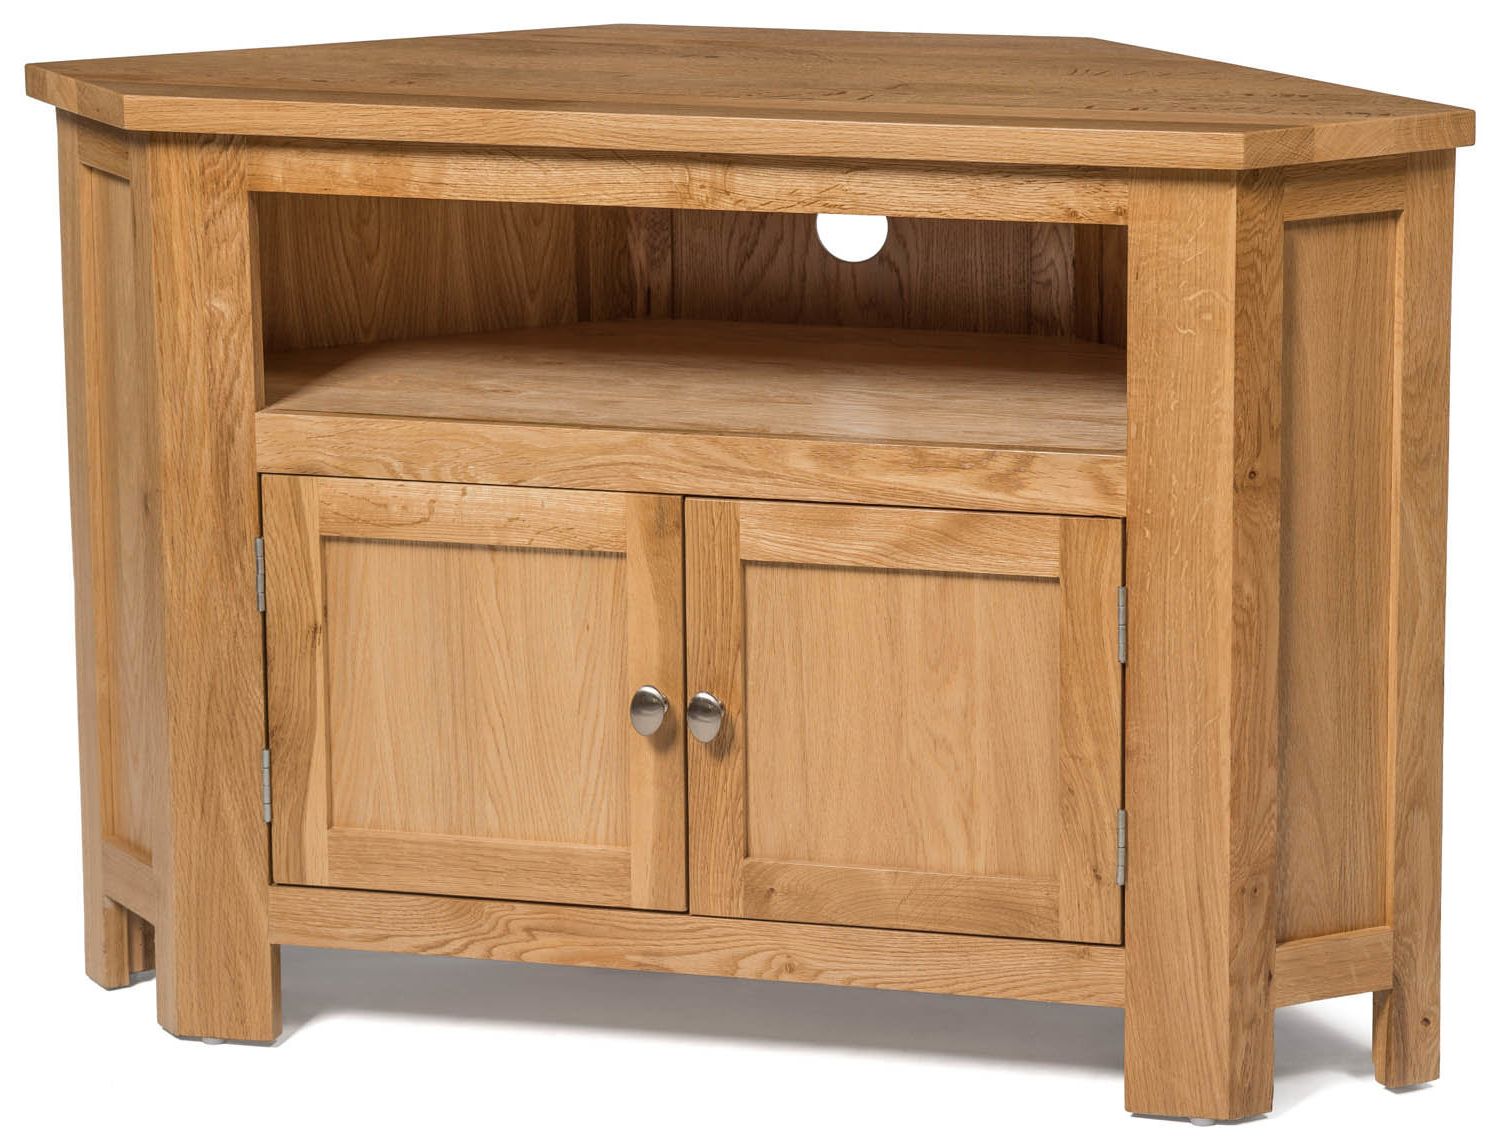 Corner Oak Tv Stands Within Current Oak Corner Tv Stands You'll Love (View 2 of 20)